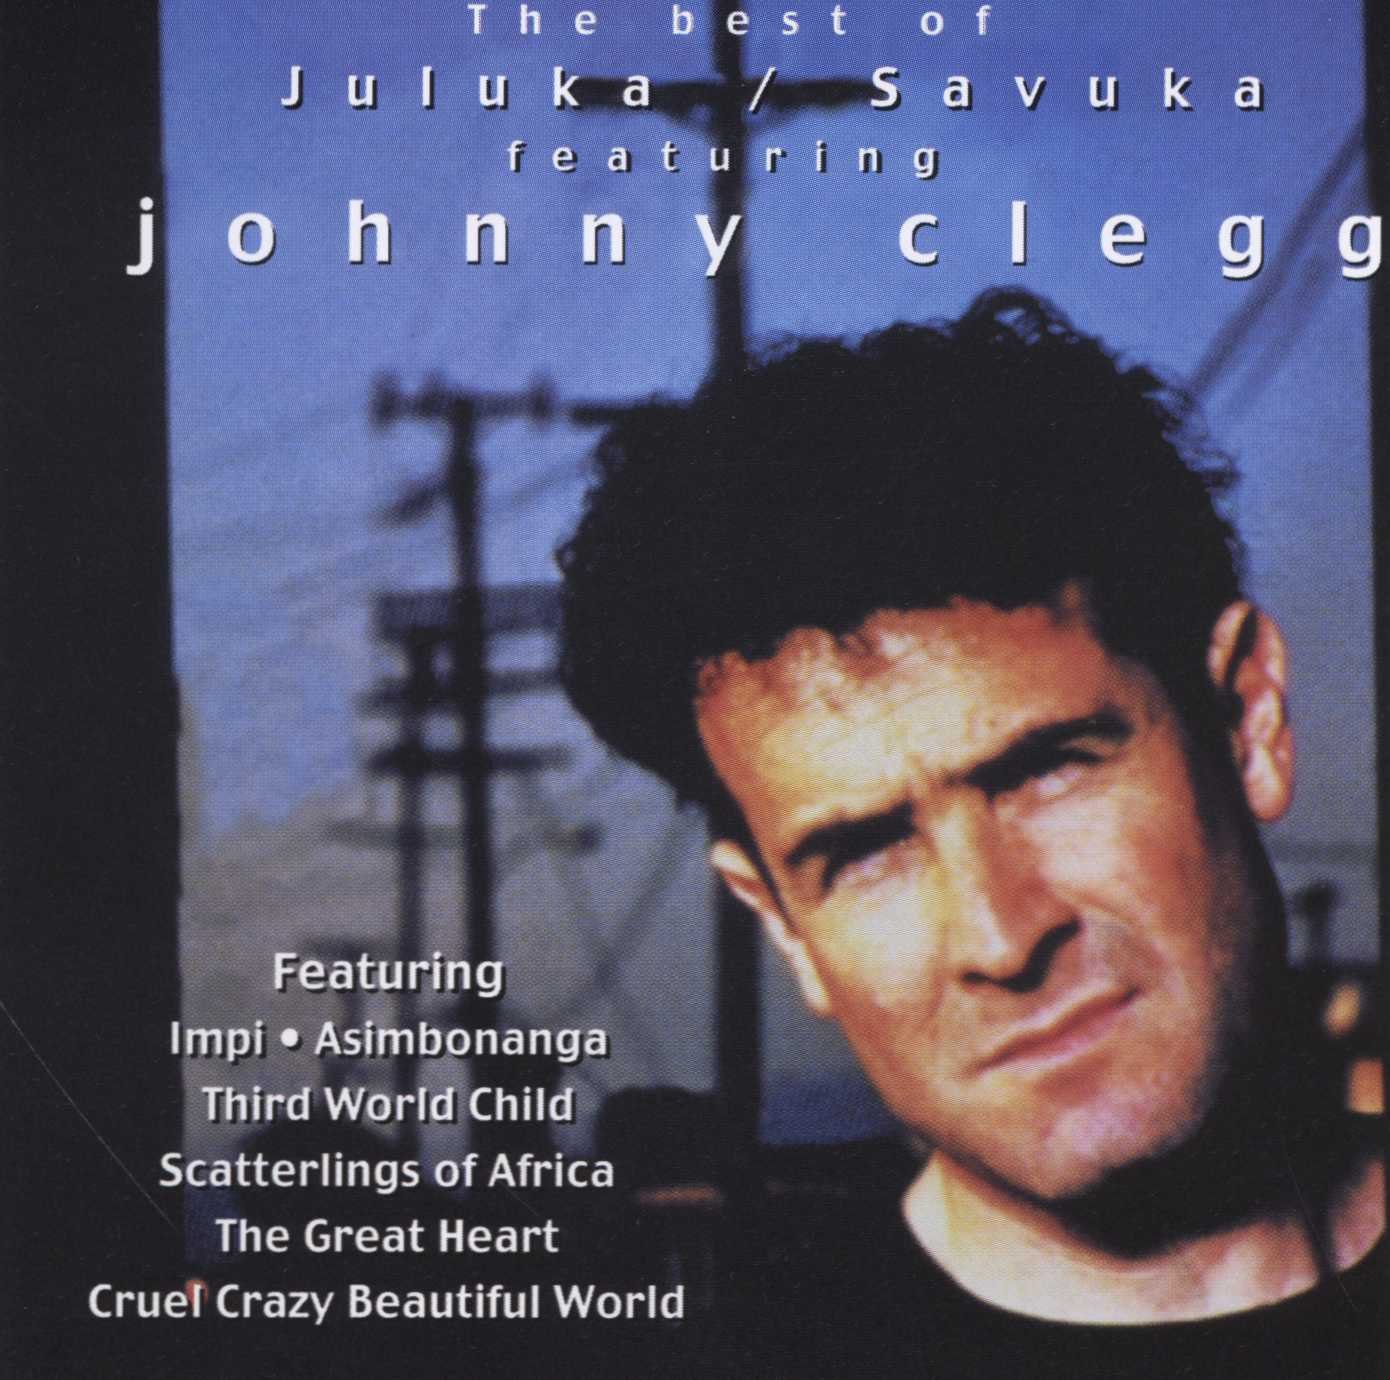 Various Artists - The Best Of Juluka / Savuka - featuring Johnny Clegg (CD)